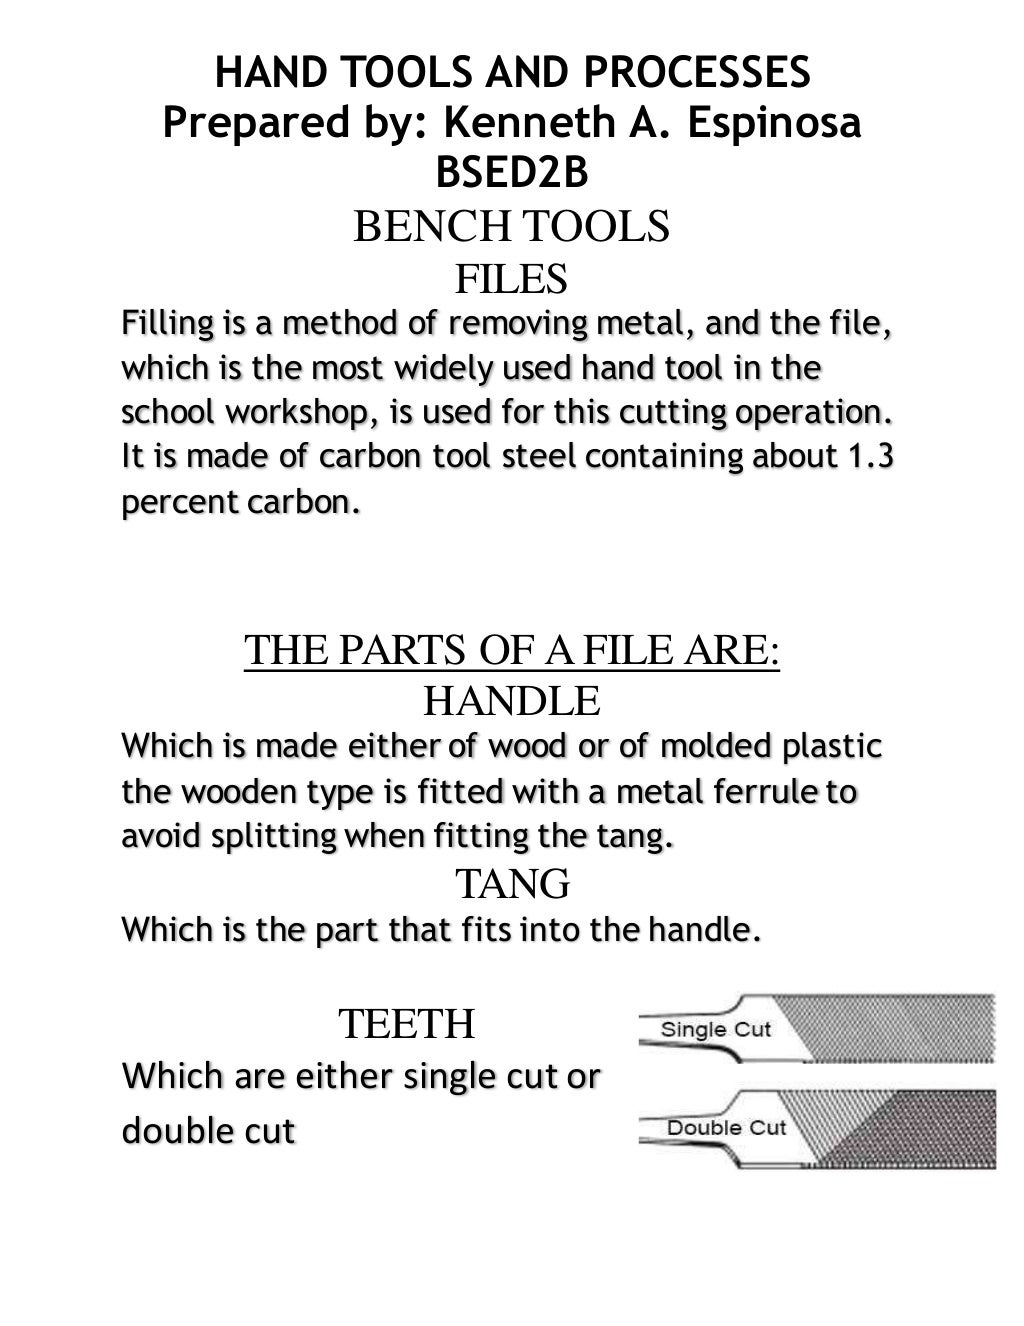 research paper on hand tools